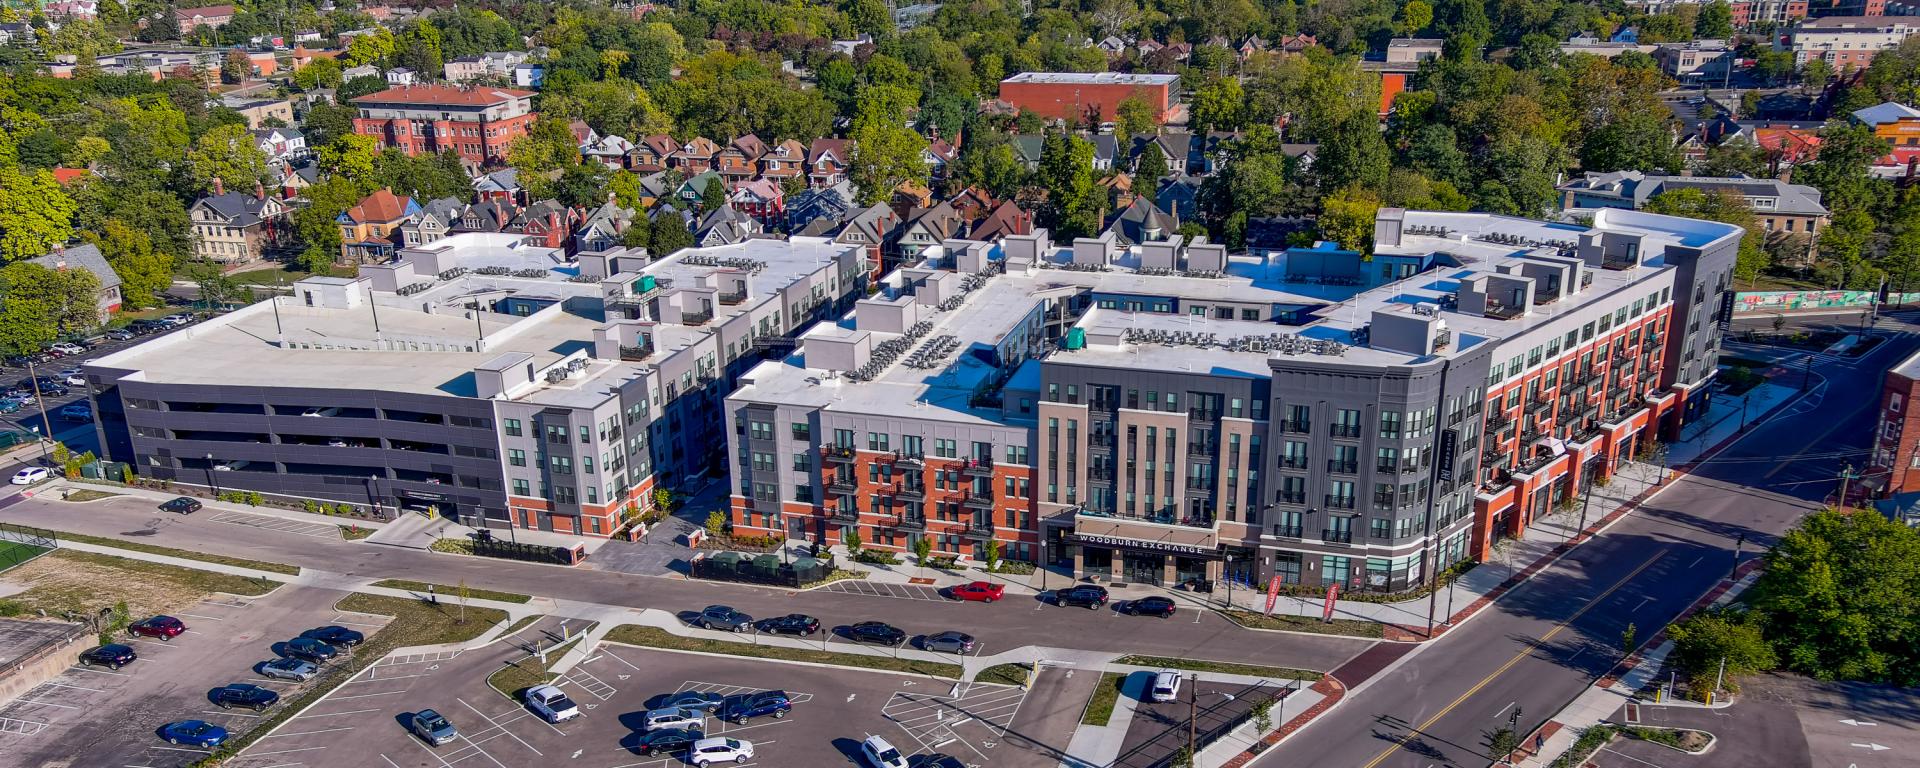 aerial photo of apartment building with parking garage